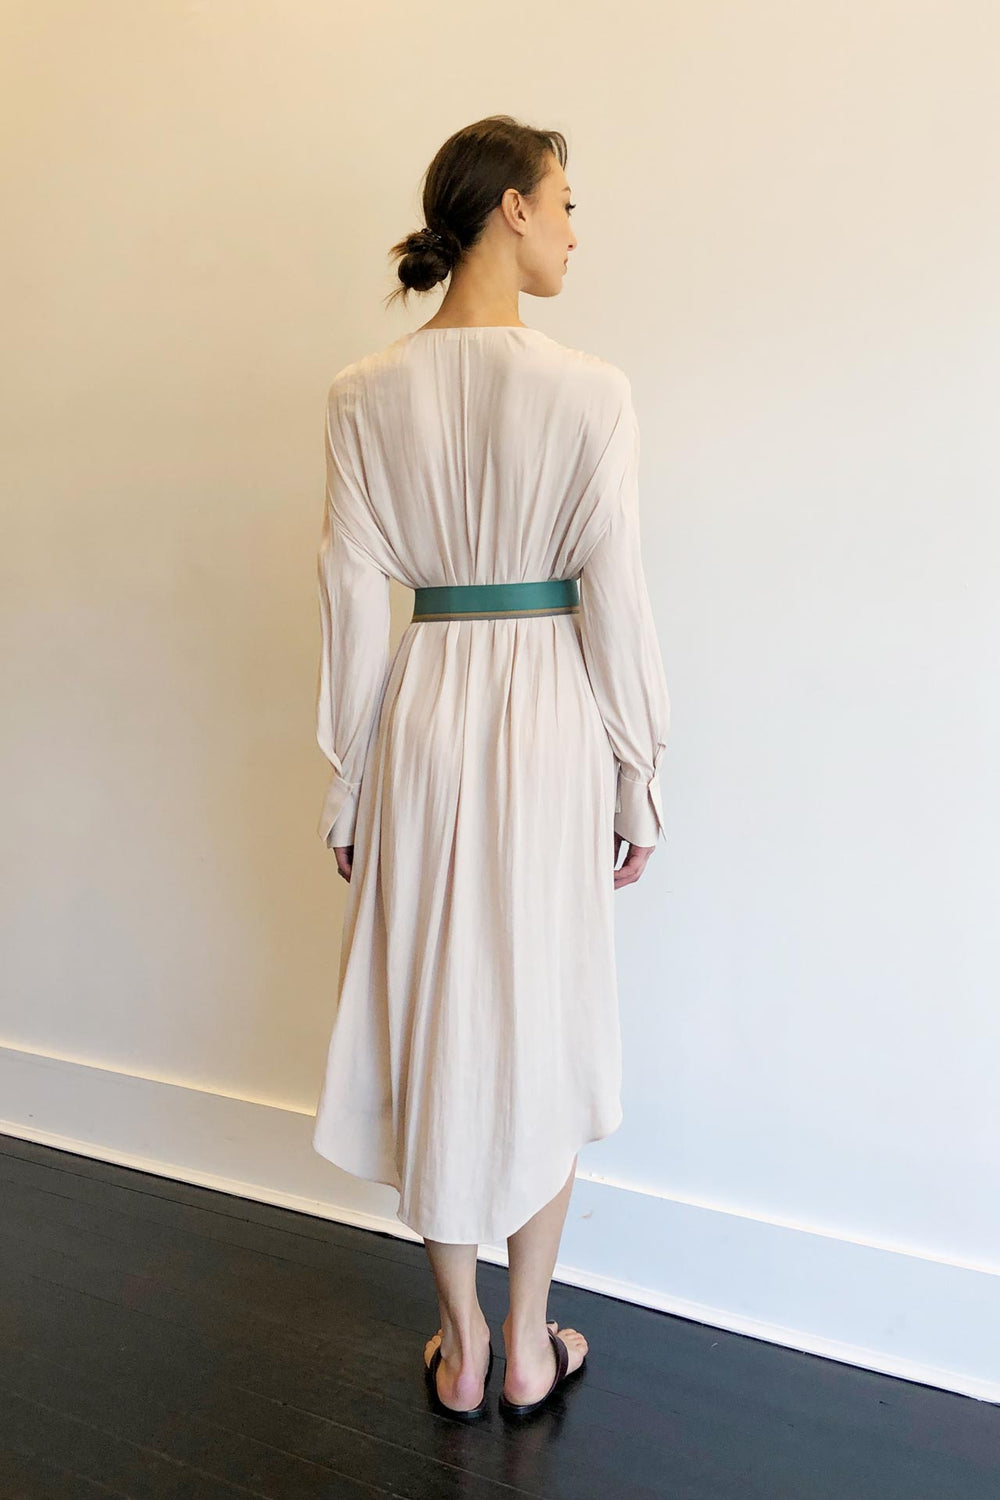 Fashion Designer CARL KAPP collection | Zil Pasyon Onesize Fits All cocktail White dress with sleeves | Sydney Australia